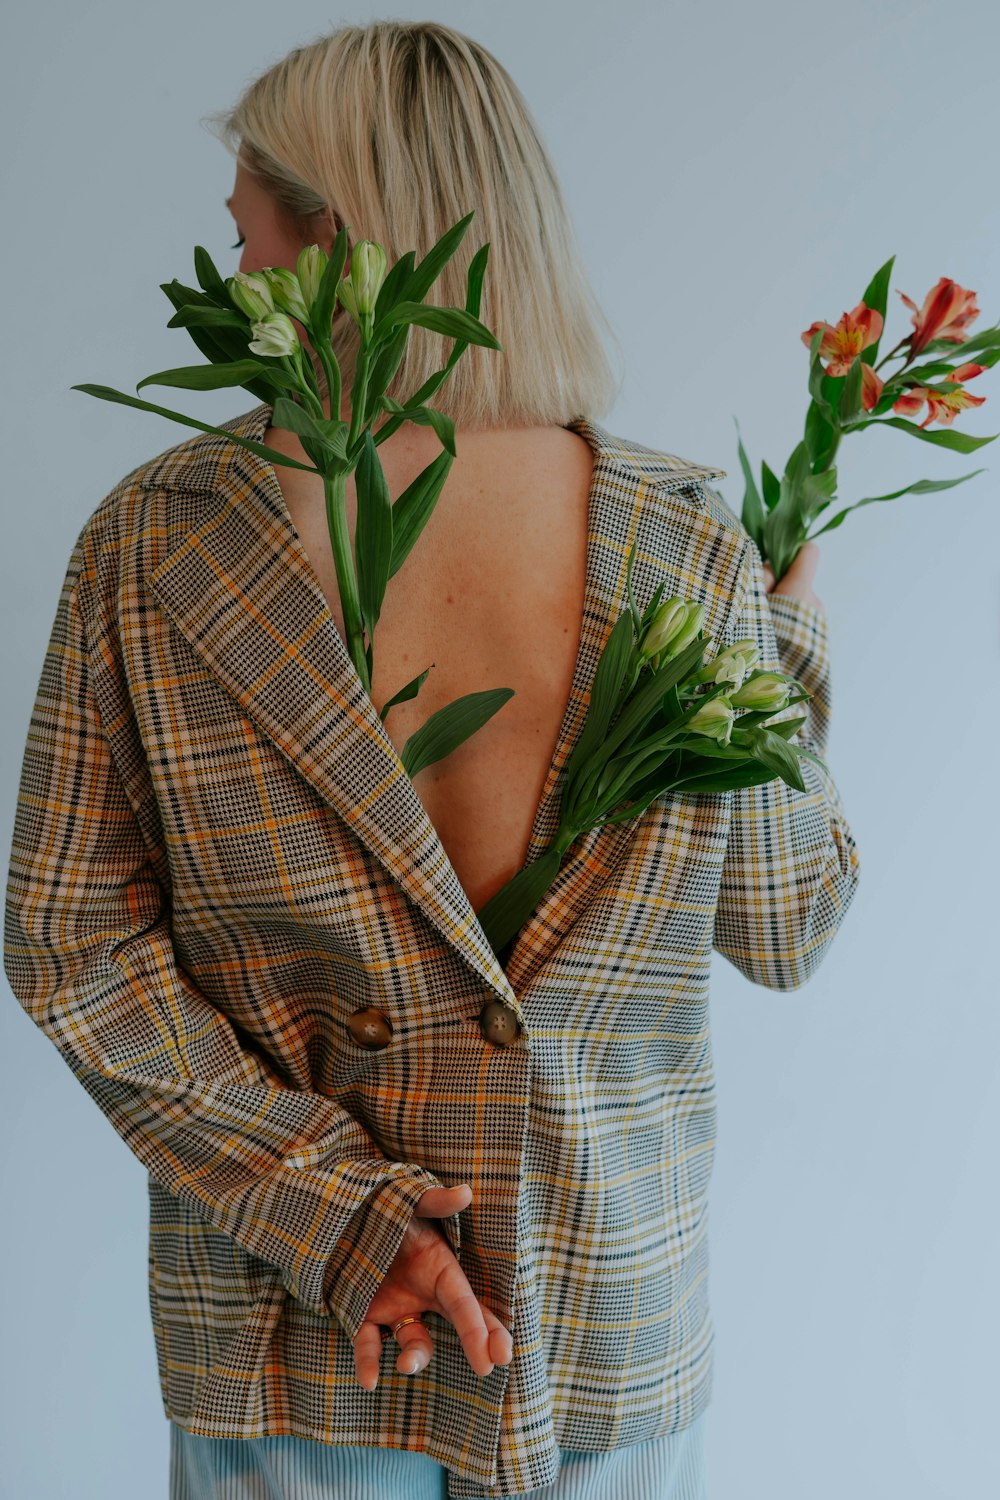 a woman wearing a plaid jacket holding flowers